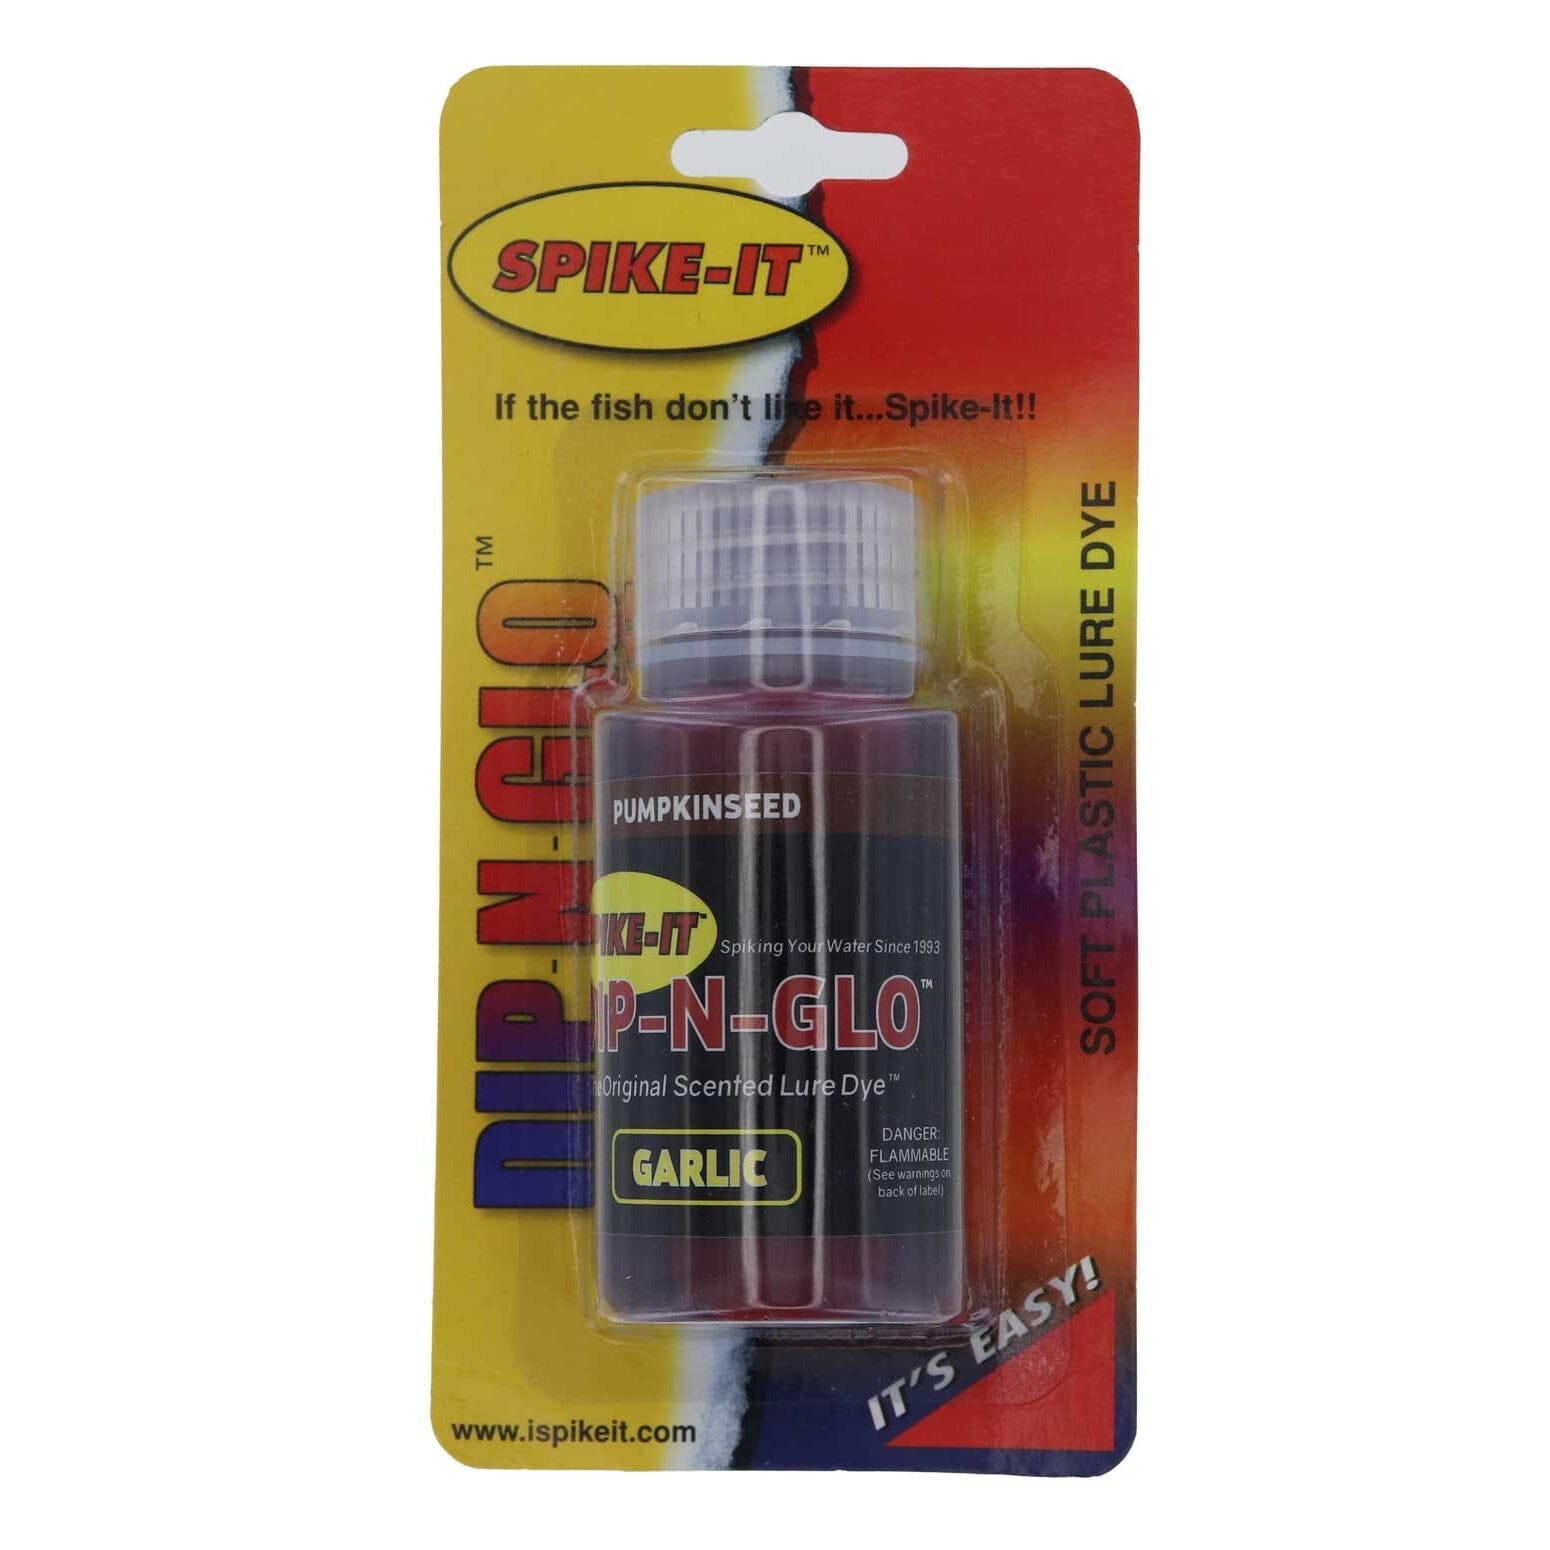 Spike-it lure dyes Assorted colors and scents-1014